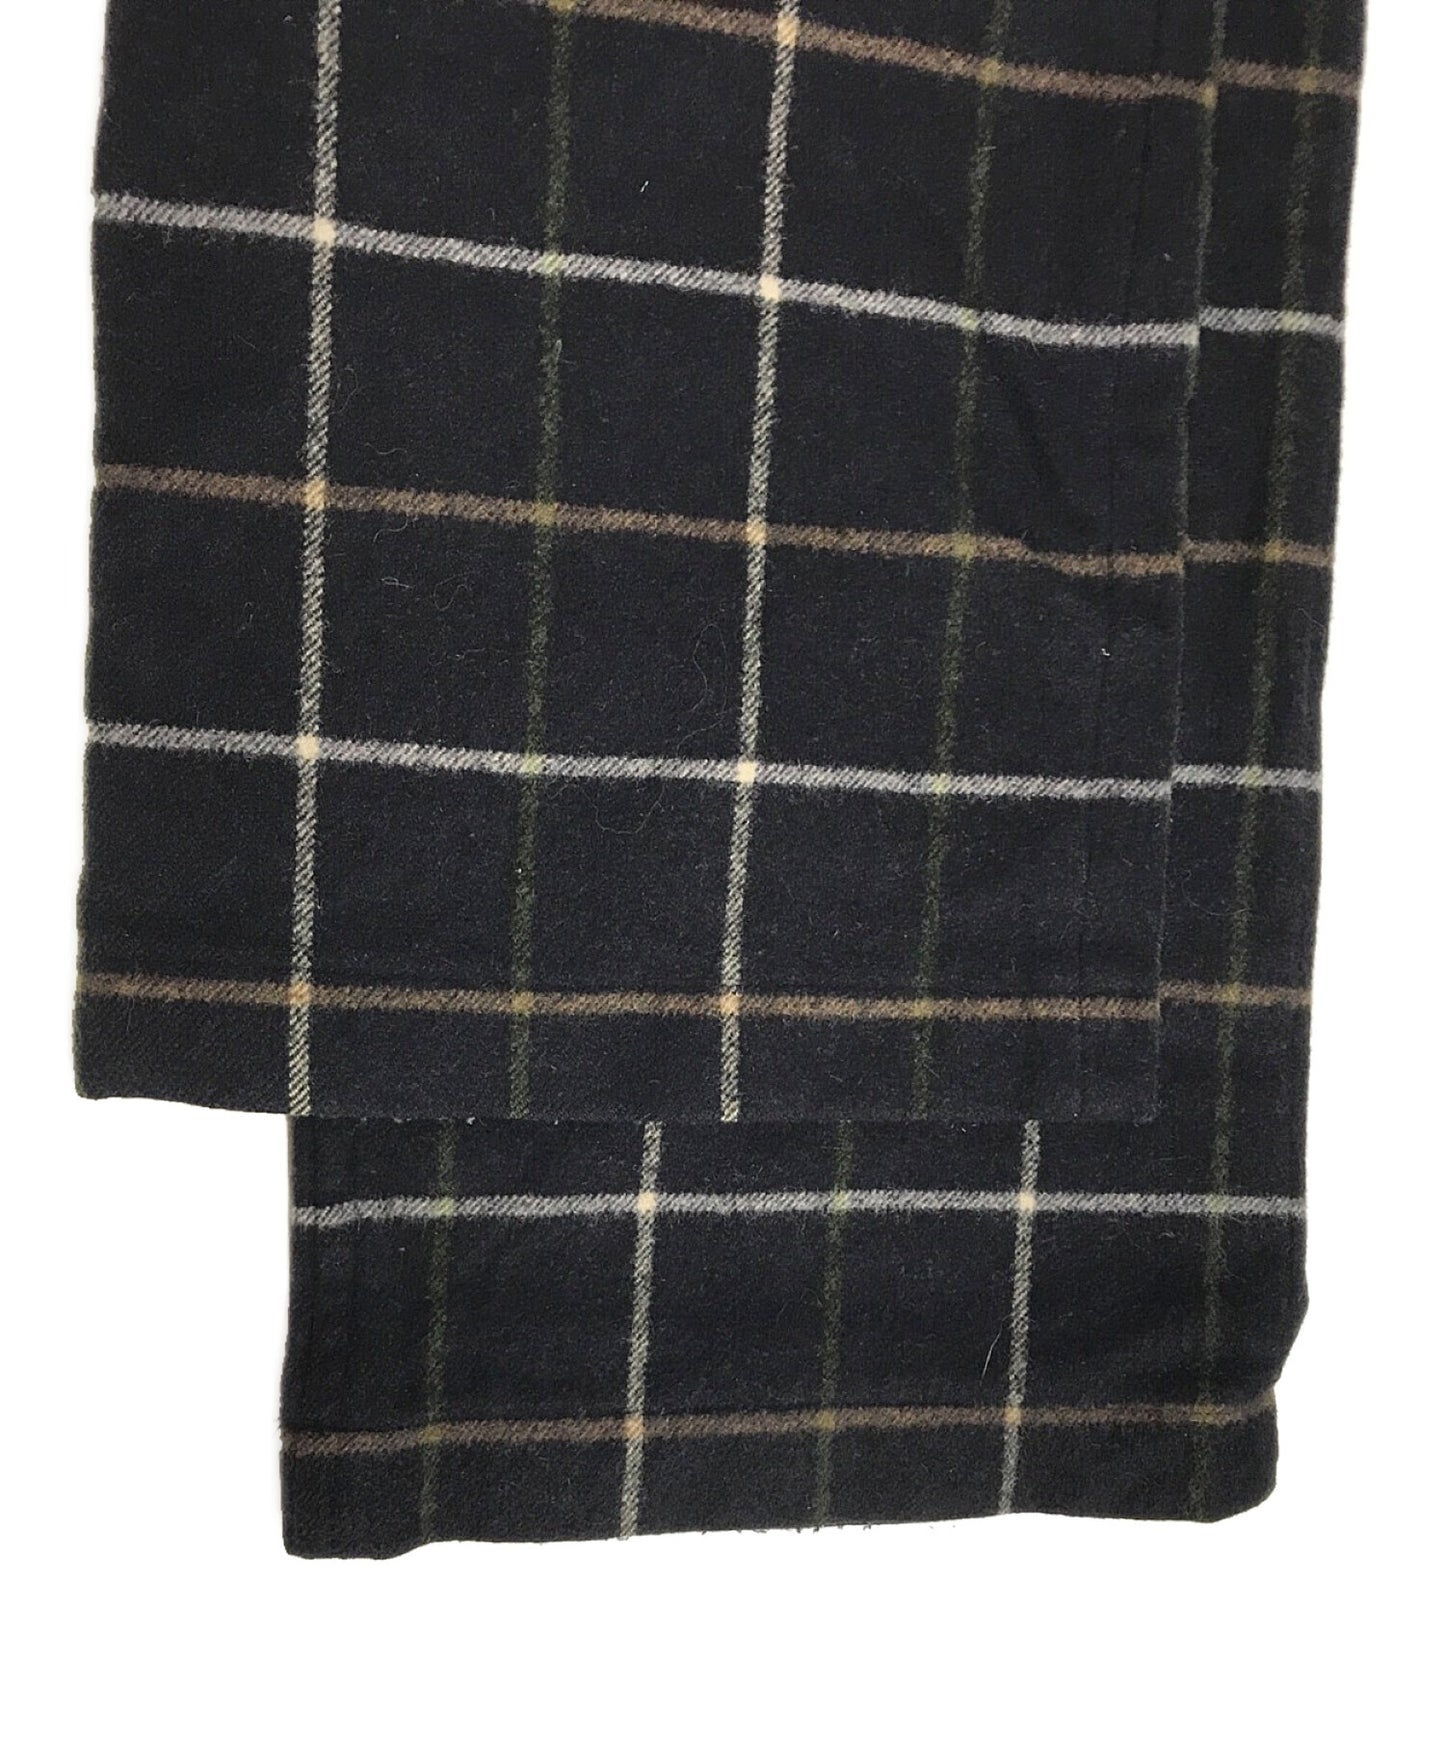 [Pre-owned] COMME des GARCONS tricot wool check pants TG-P017